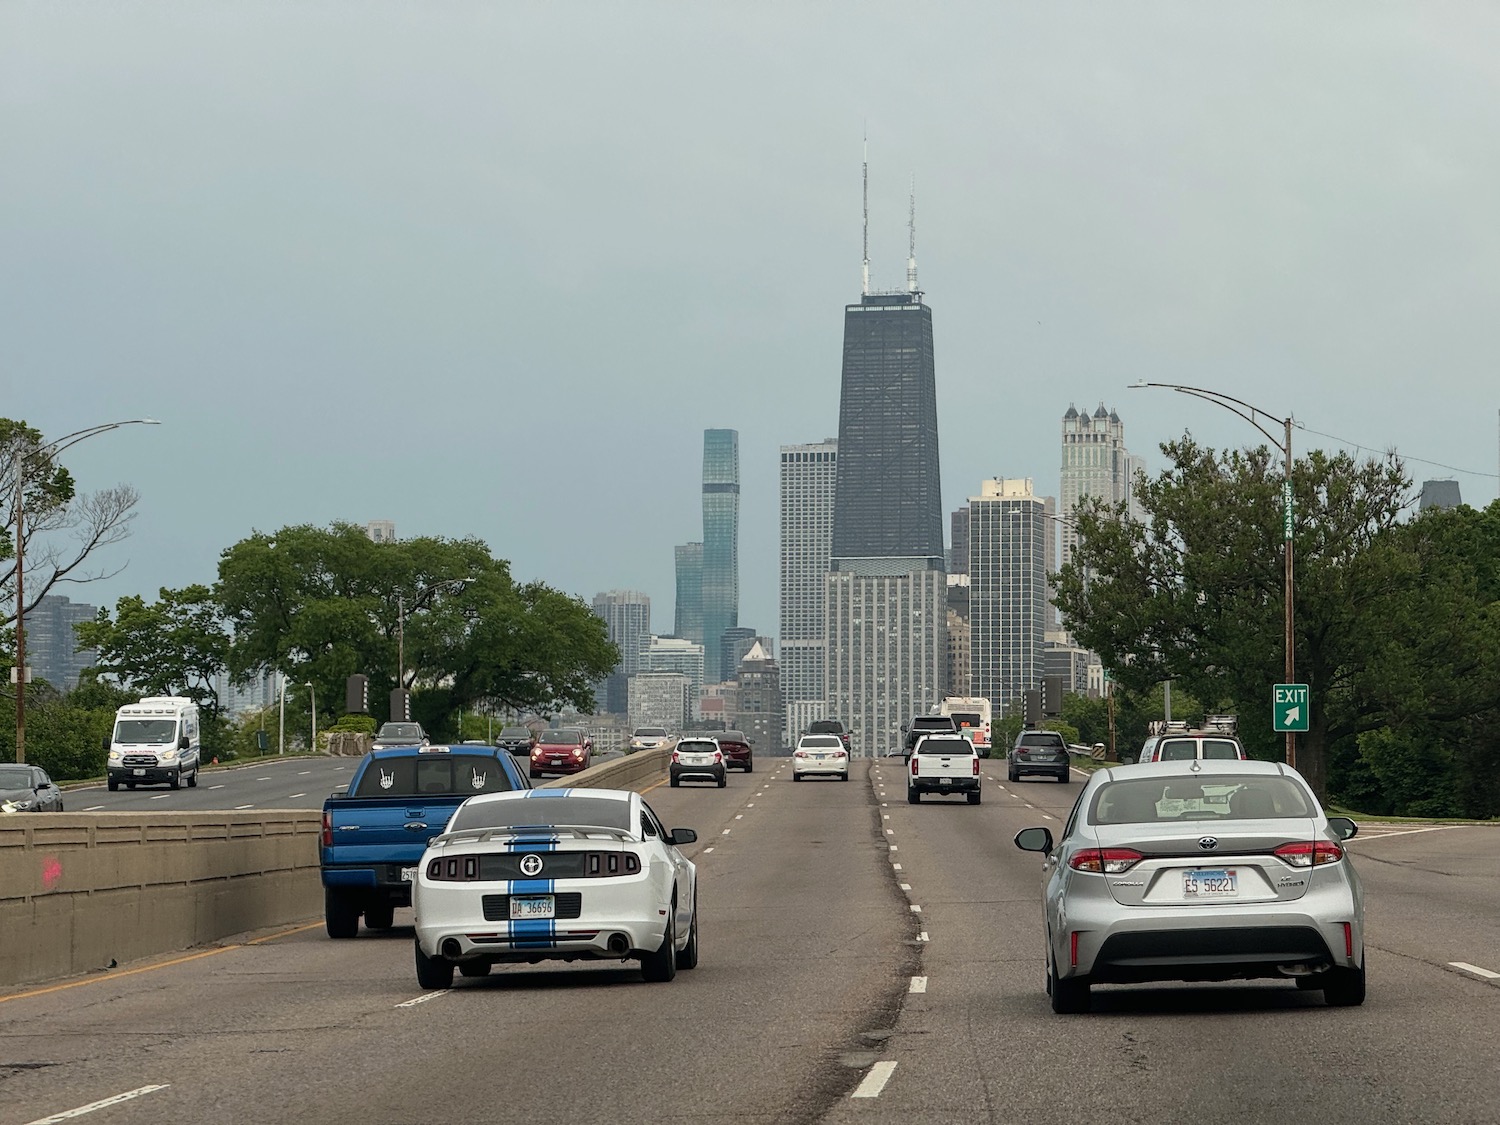 a group of cars on a road with a city in the background